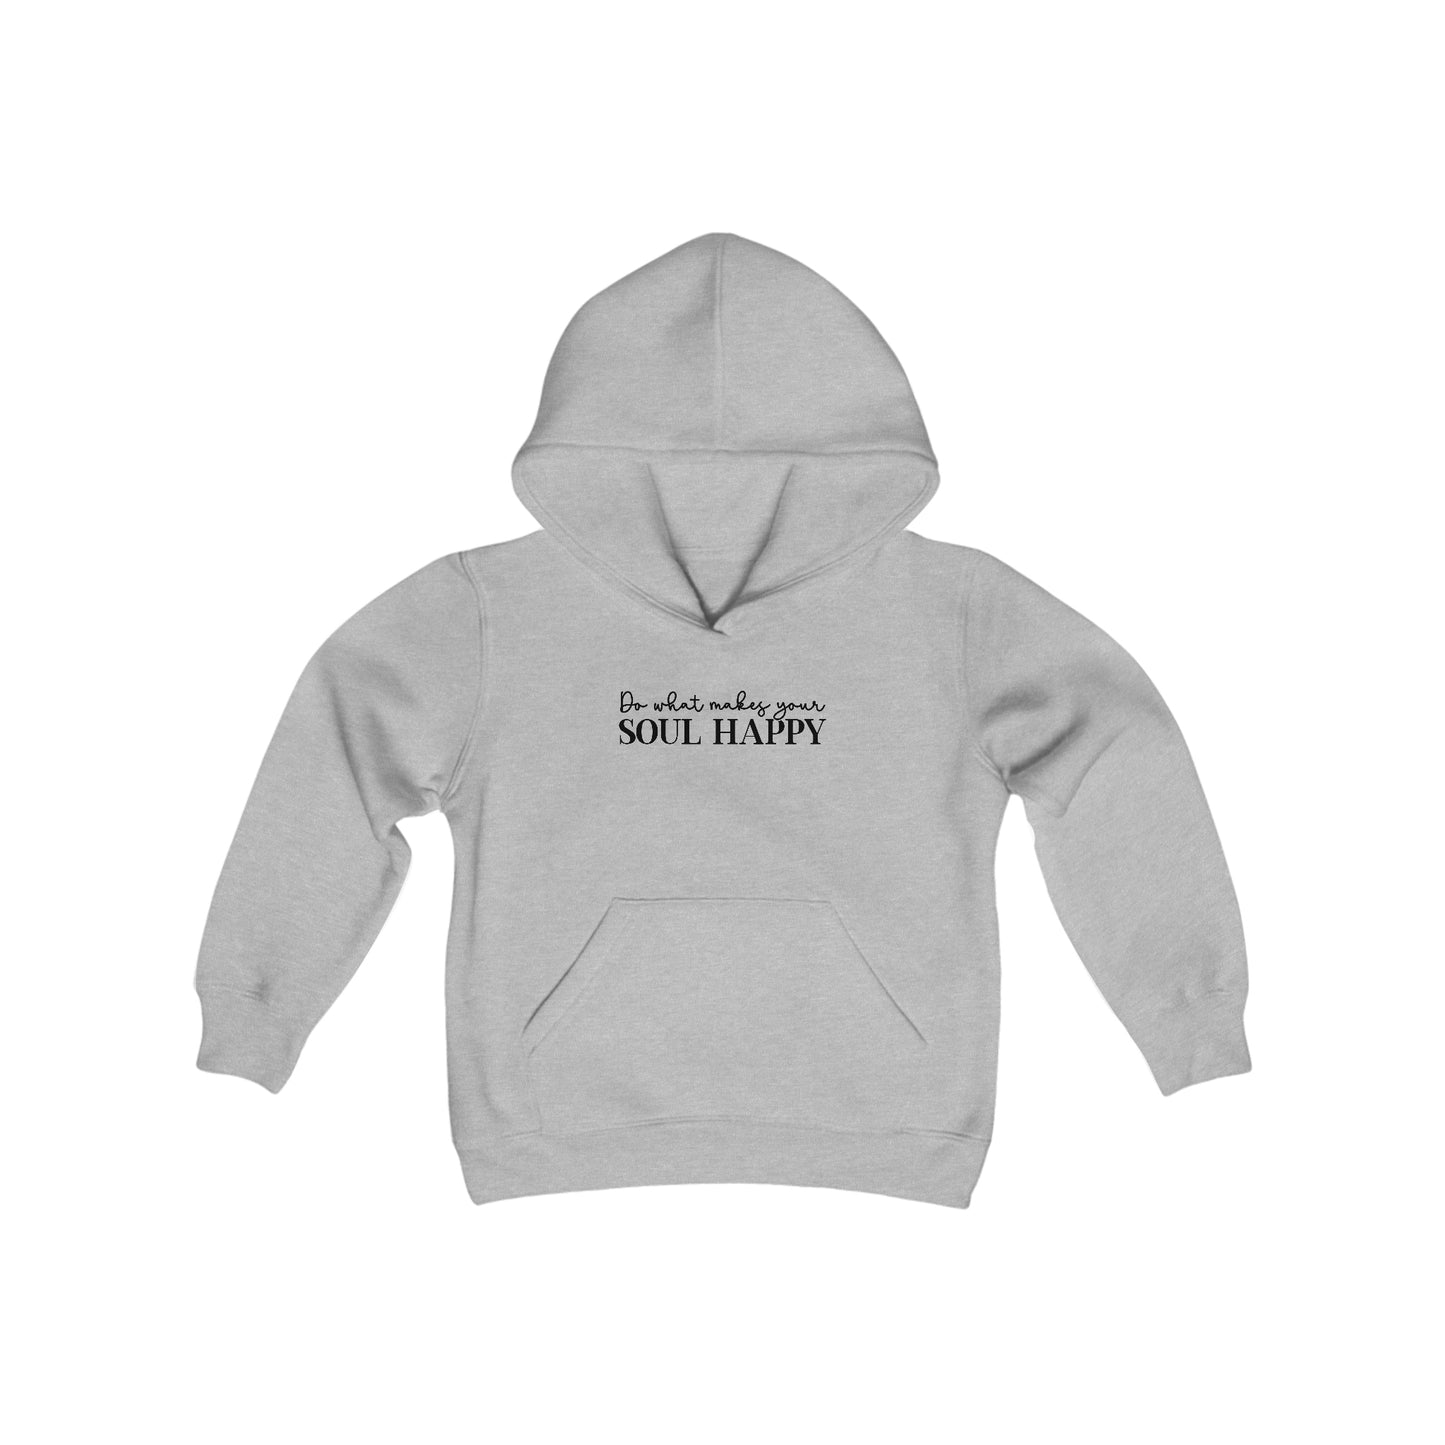 Do What Makes Your Soul Happy - Believe in Yourself - Self Love - Self Acceptance - Inspire - Youth Heavy Blend Hooded Sweatshirt